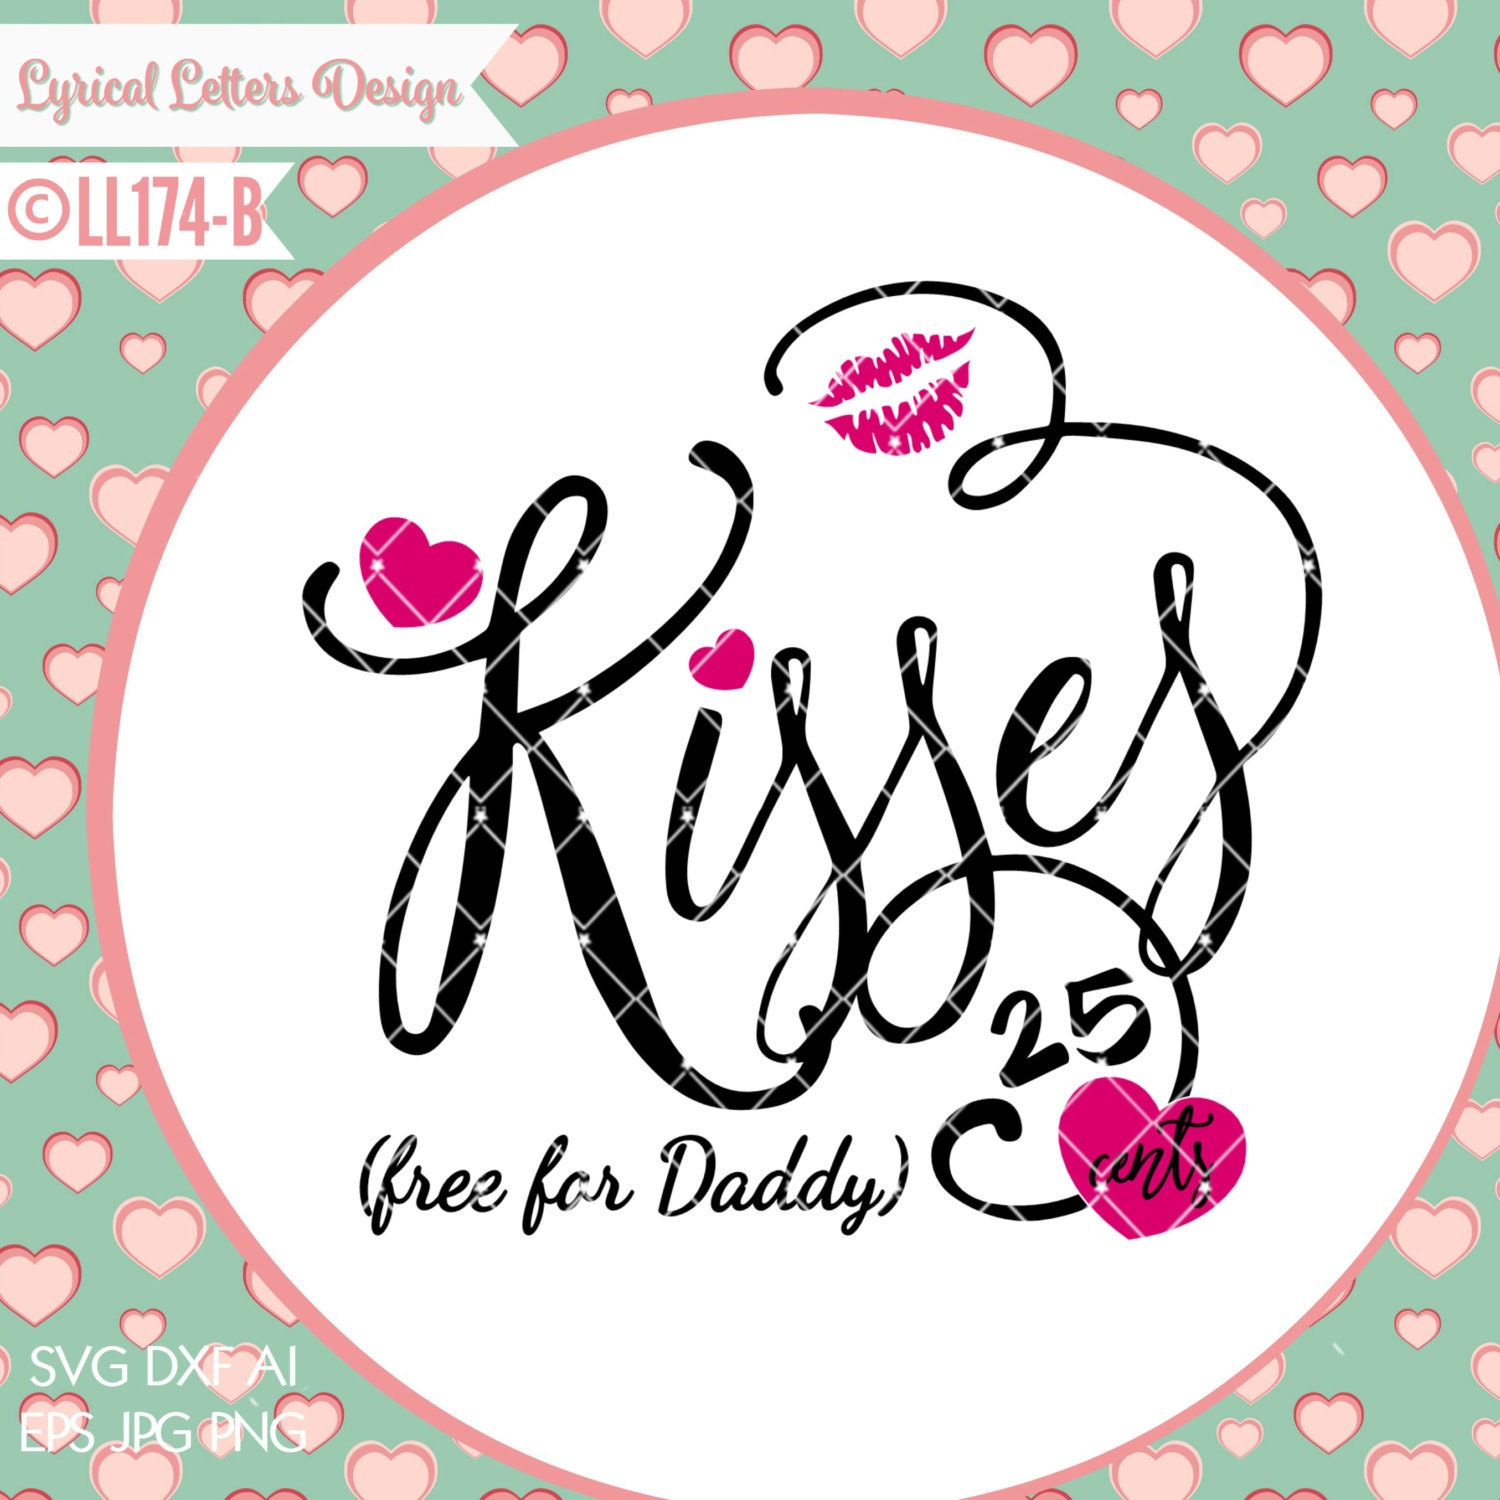 Download Kisses .25 Free for Daddy Valentine's Day LL174 B SVG